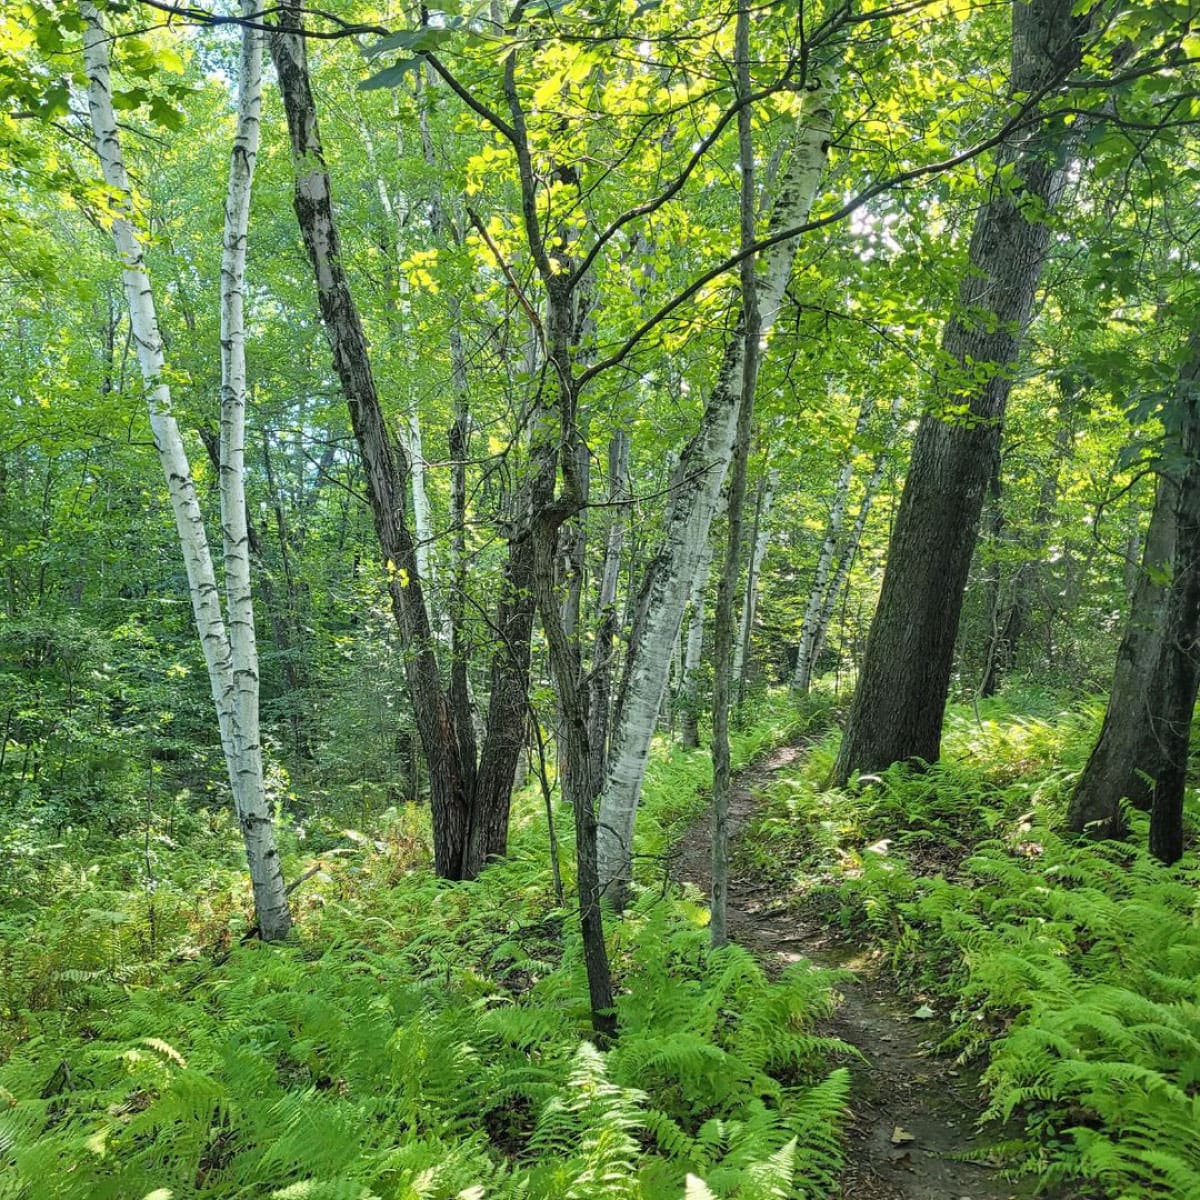 Trail through a wooded area